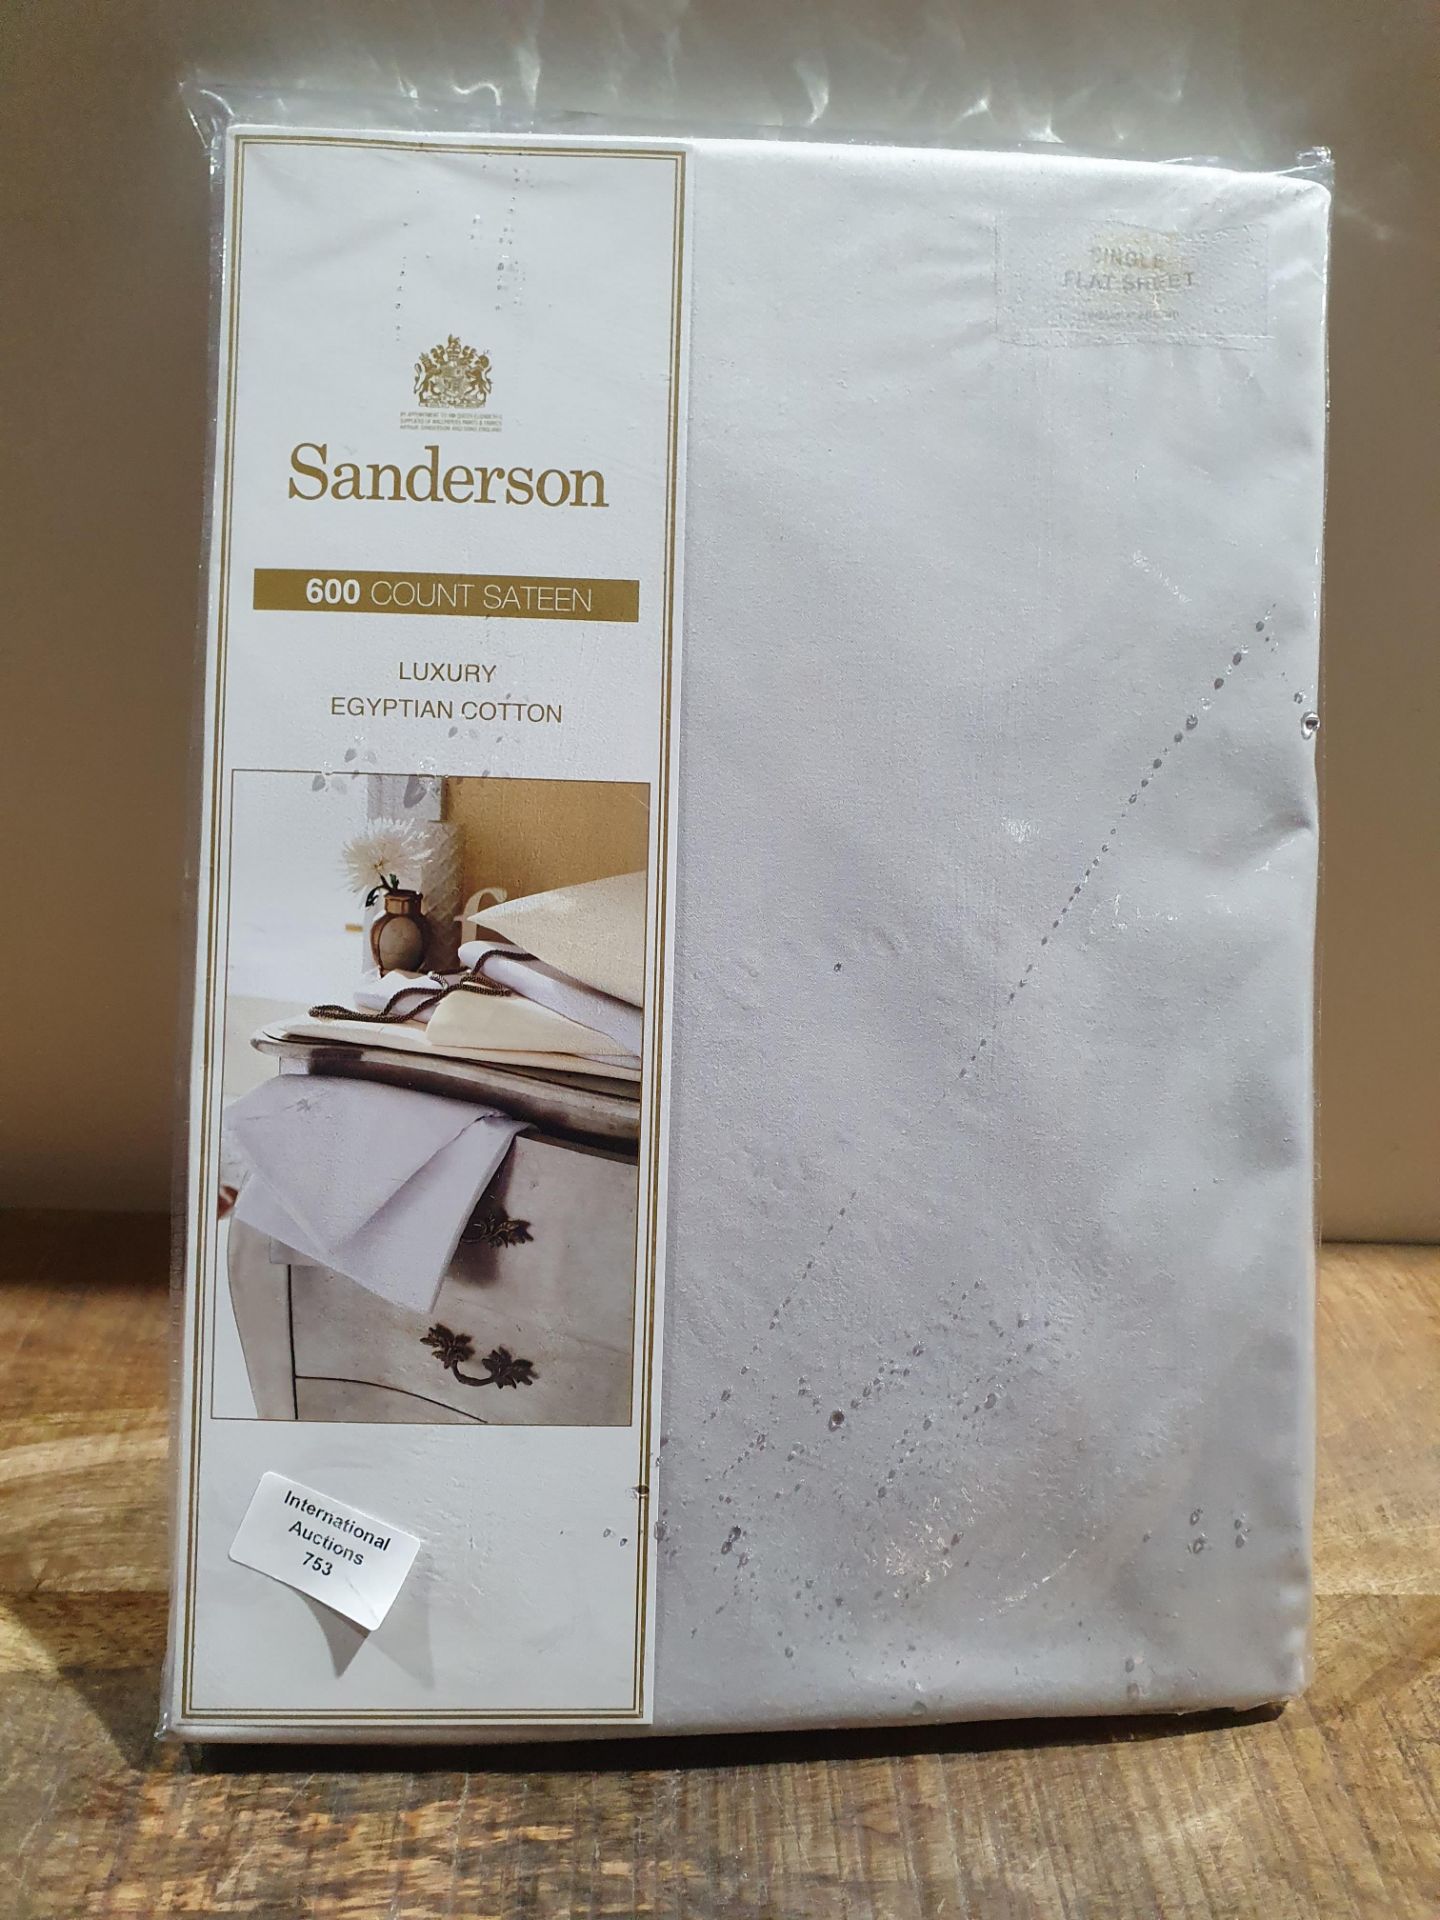 SANDERSON 600 COUNT SINGLE FLAT SHEET RRP £50 Condition ReportAppraisal Available on Request - All